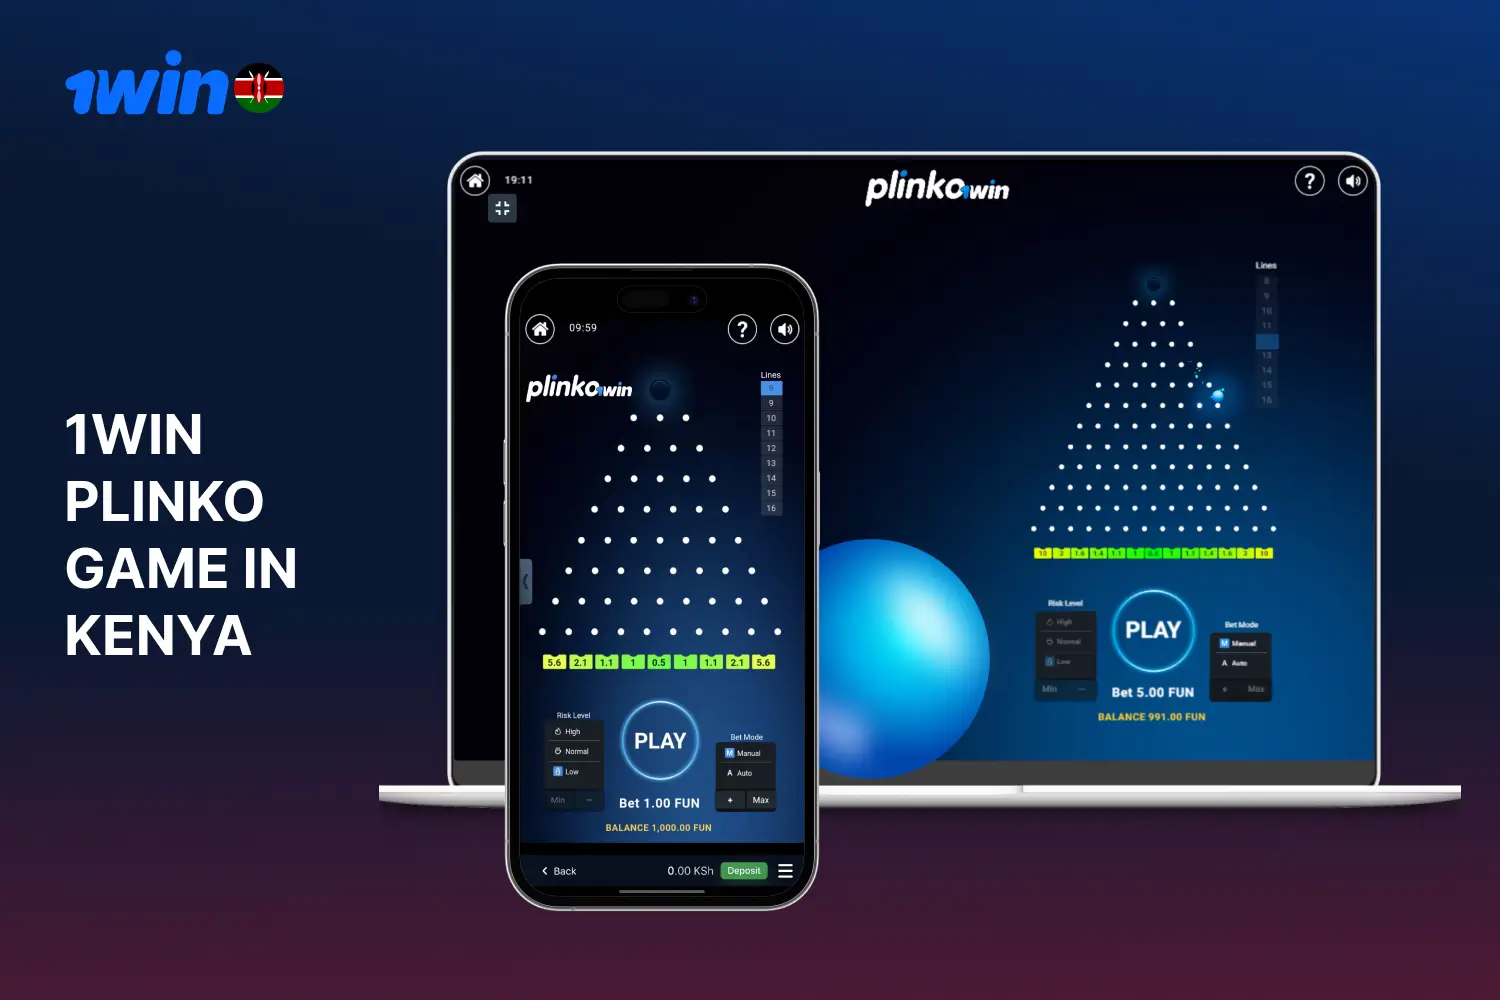 Popular game Plinko is available at 1win Kenya